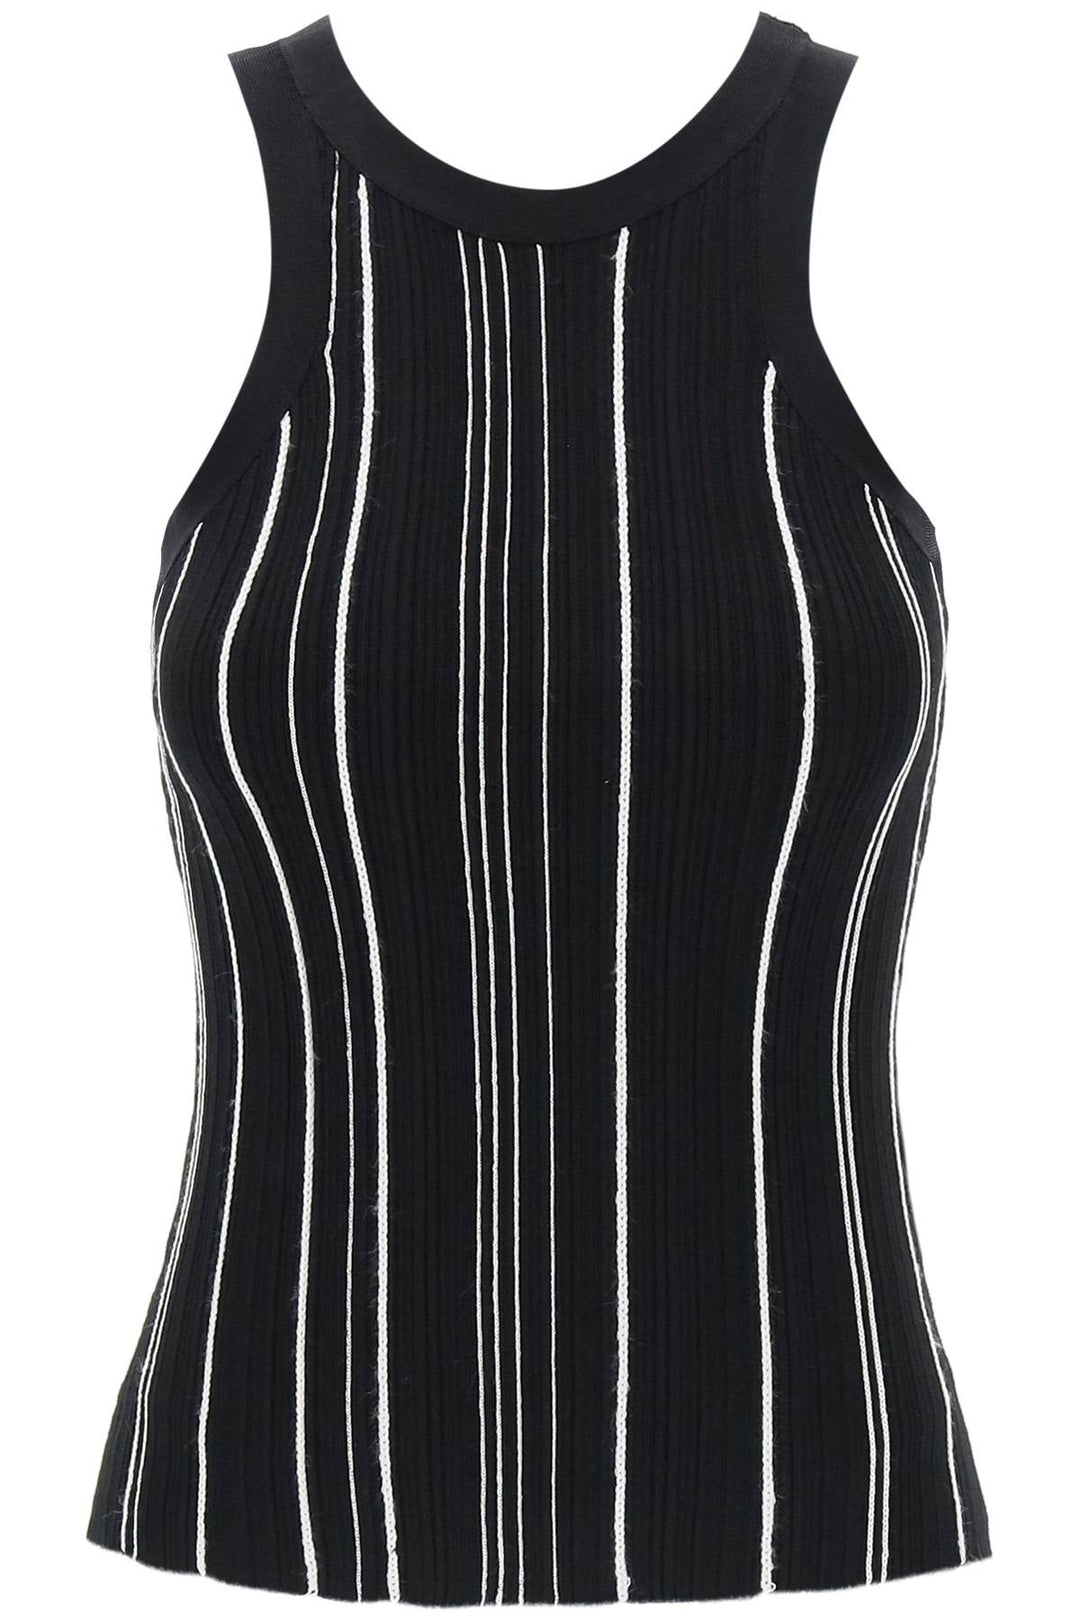 Toteme Ribbed Knit Tank Top With Spaghetti   Nero